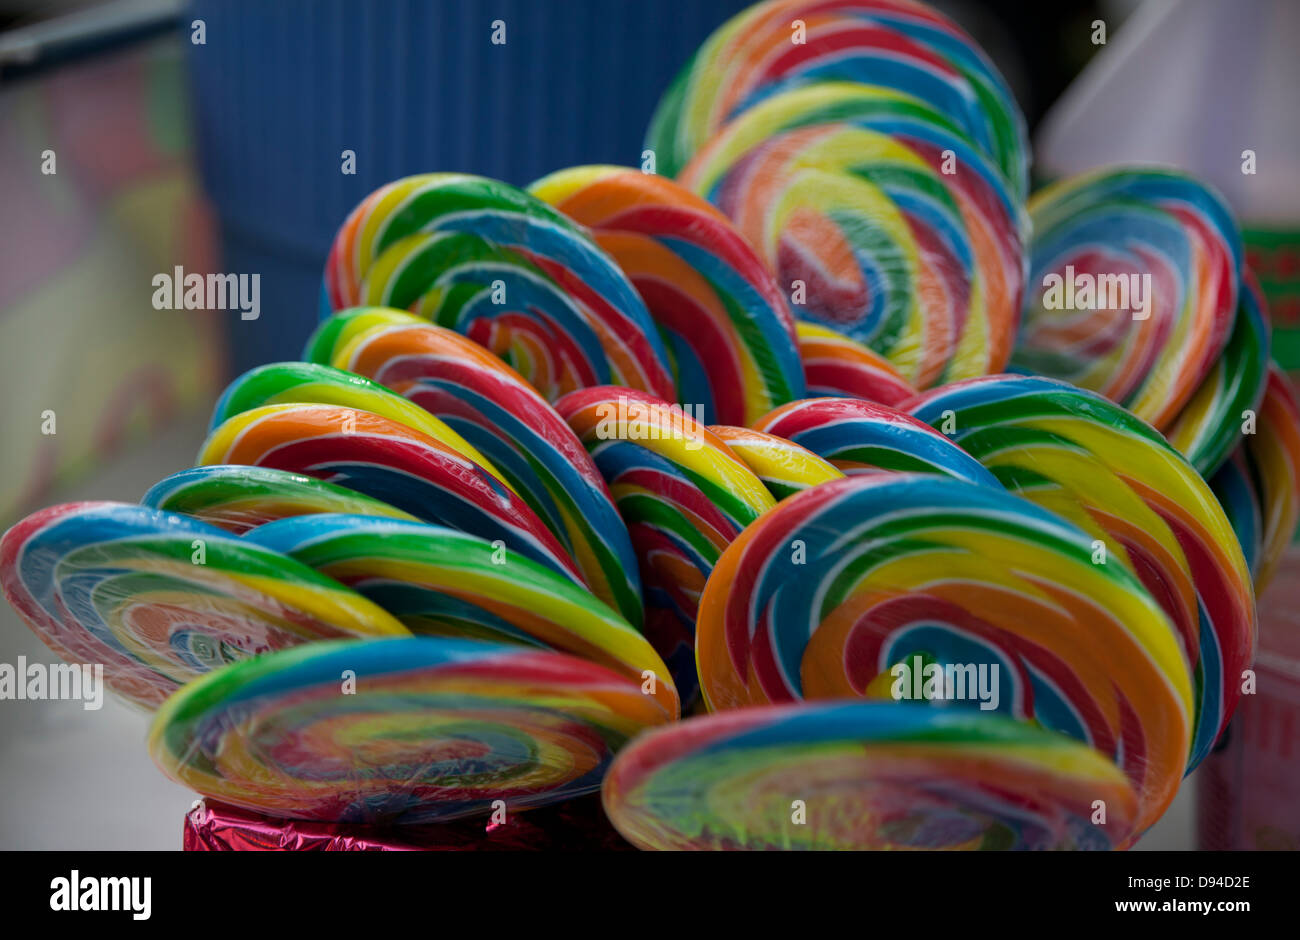 Colorful lollipops for sale at a carnival. Stock Photo